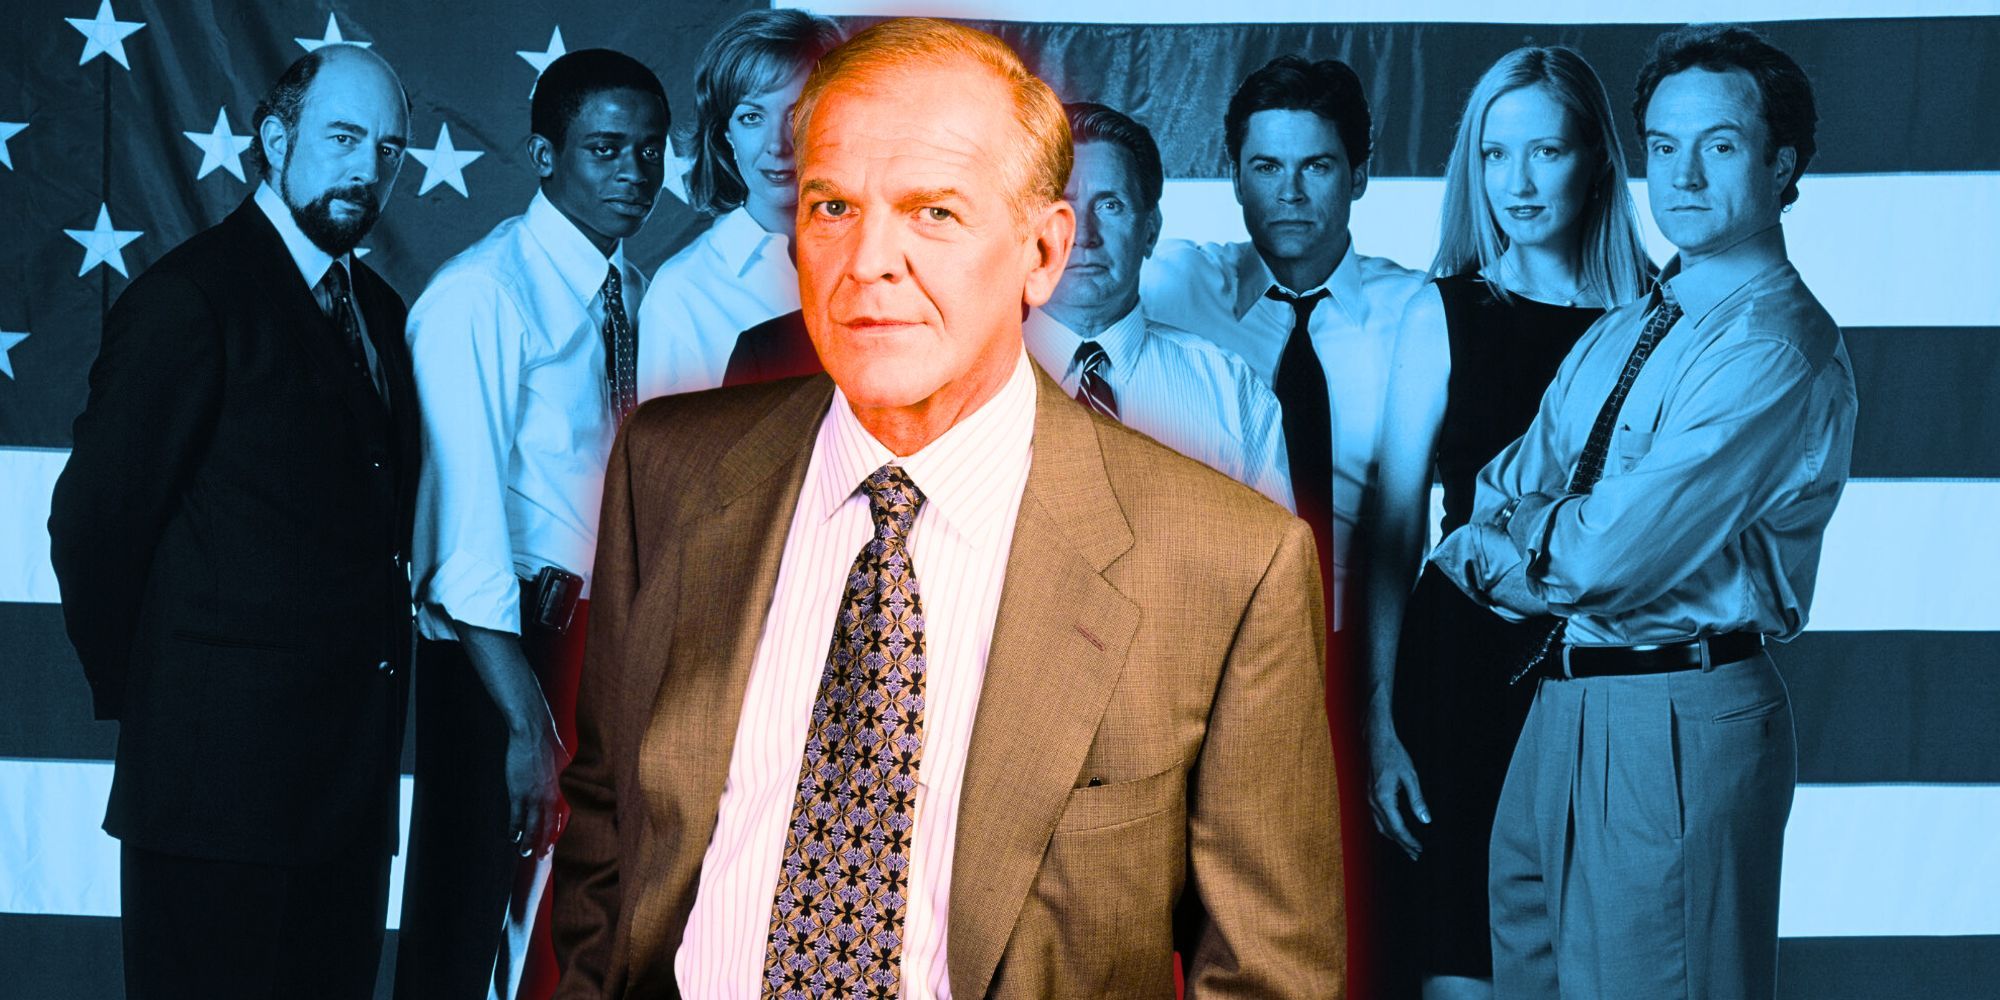 John Spencer as Leo McGarry with West Wing cast background